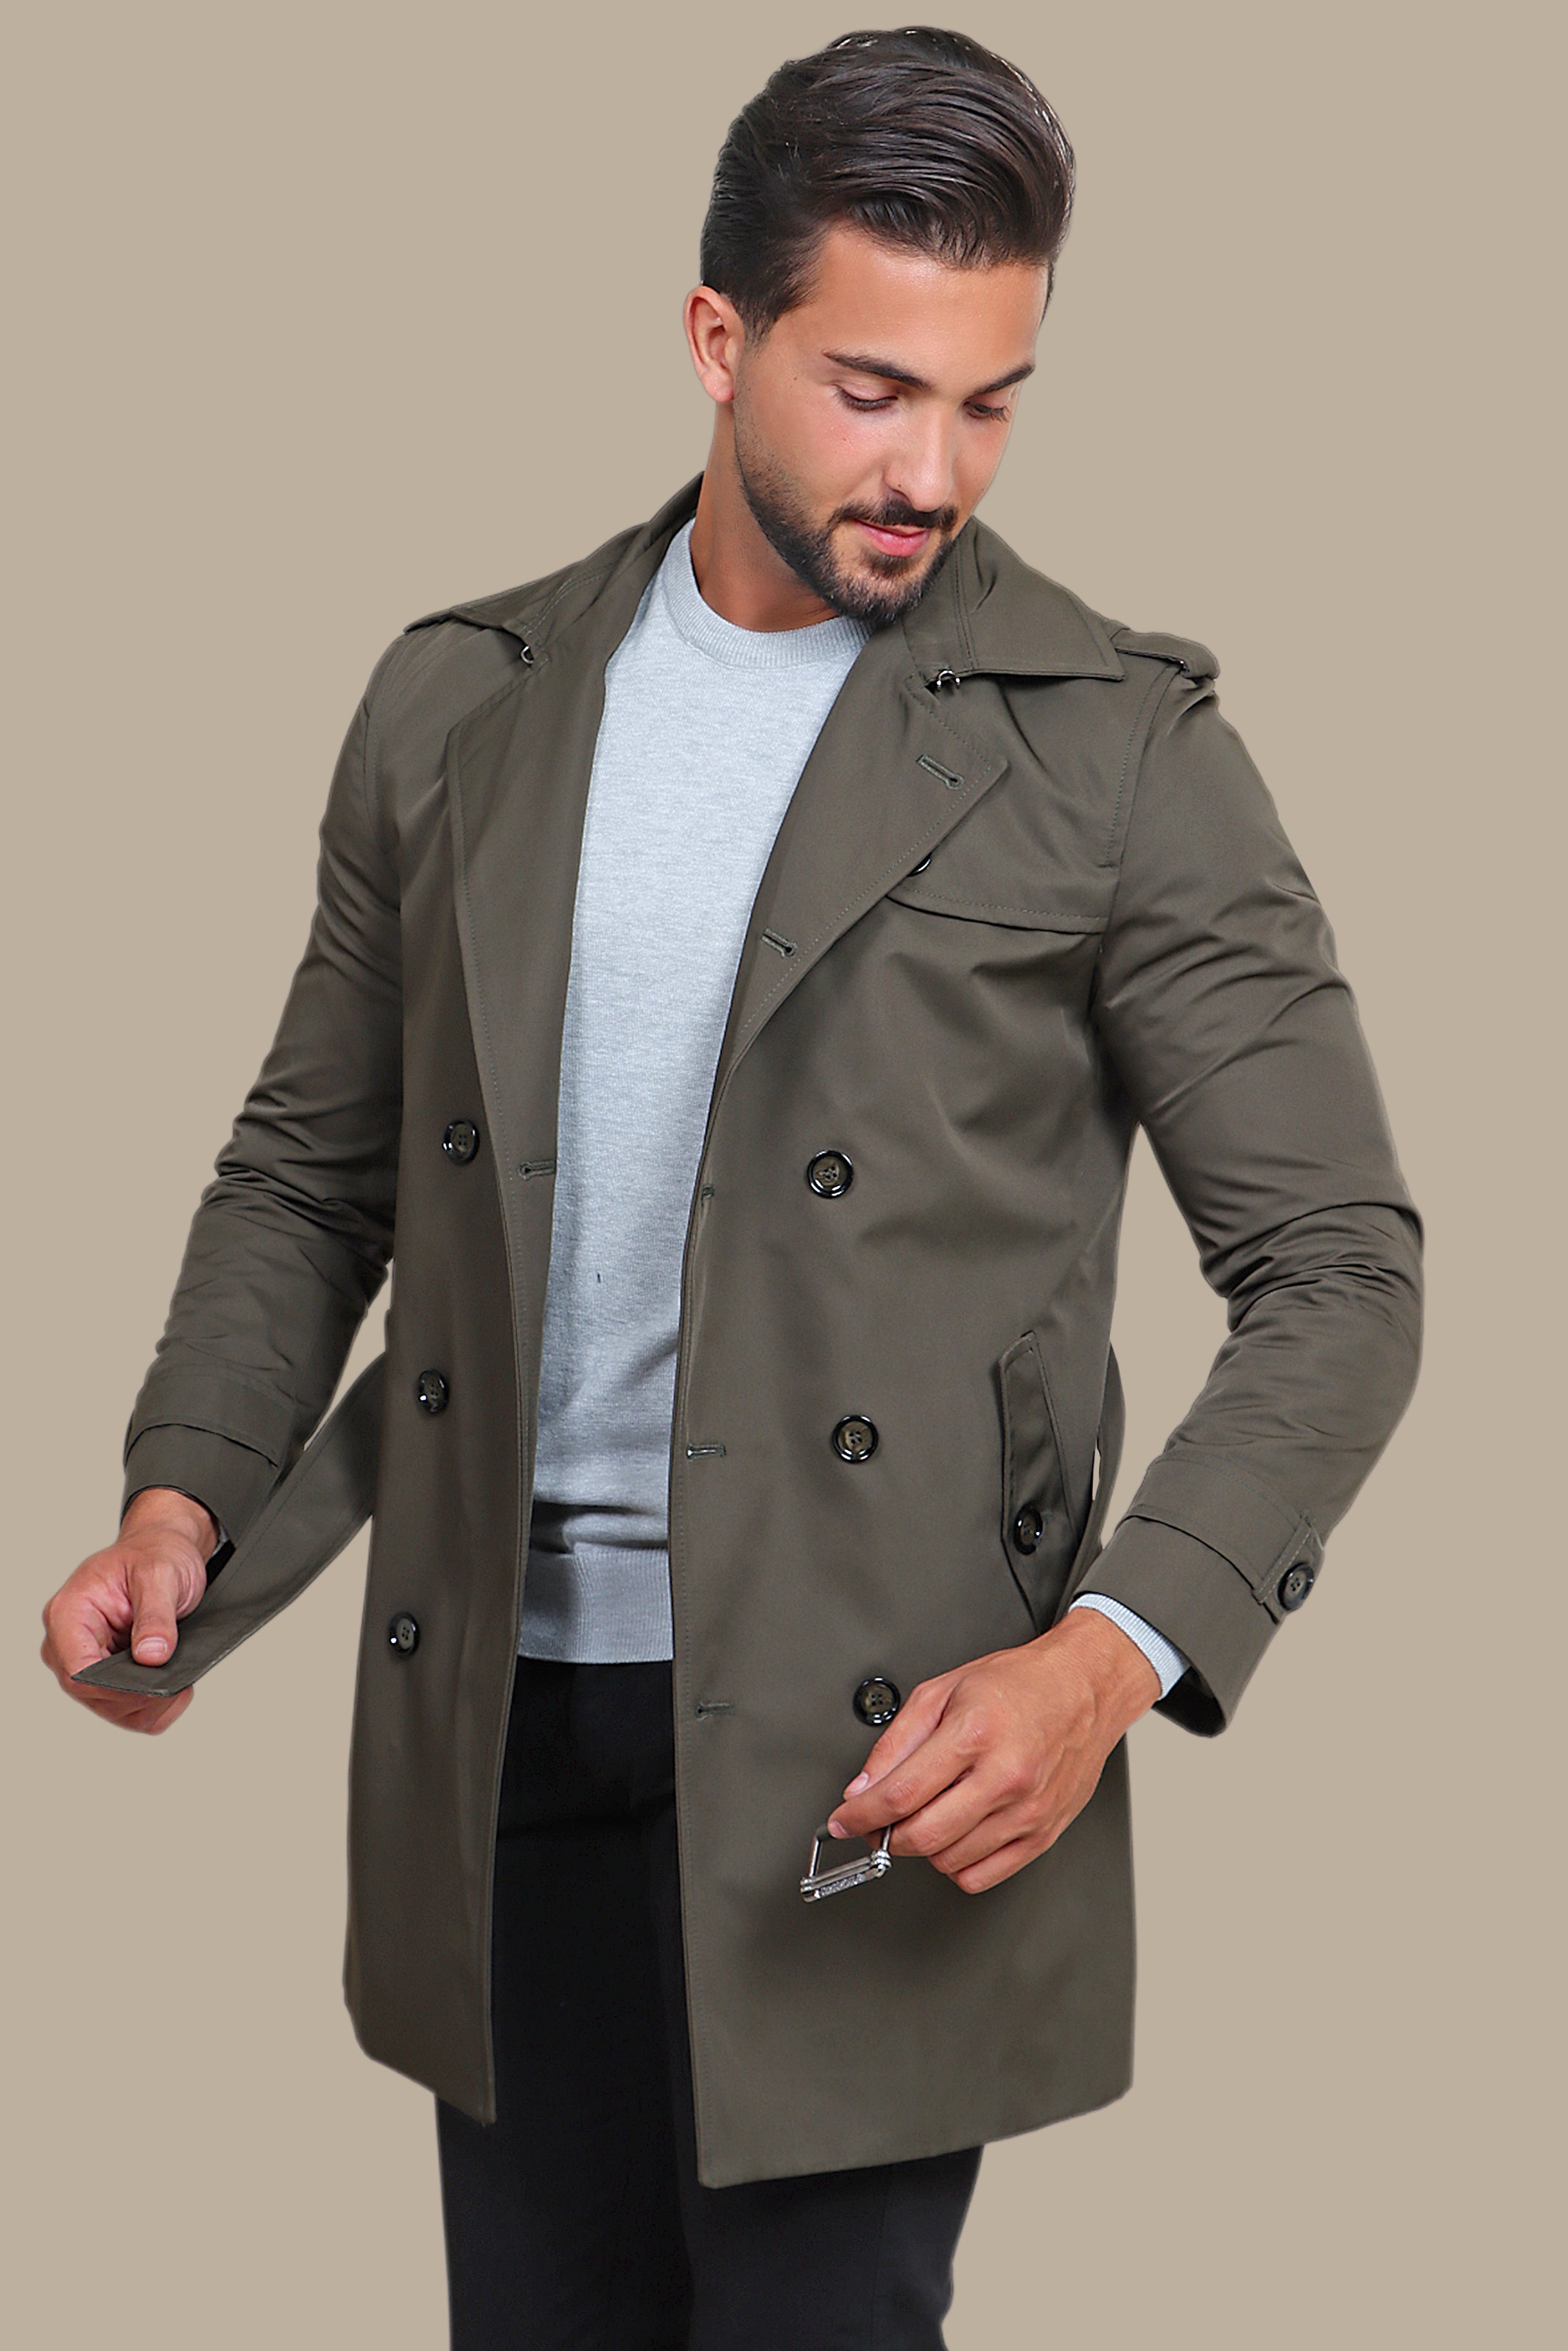 Olive Drab Defender: The Ultimate Trench Coat for Military Style